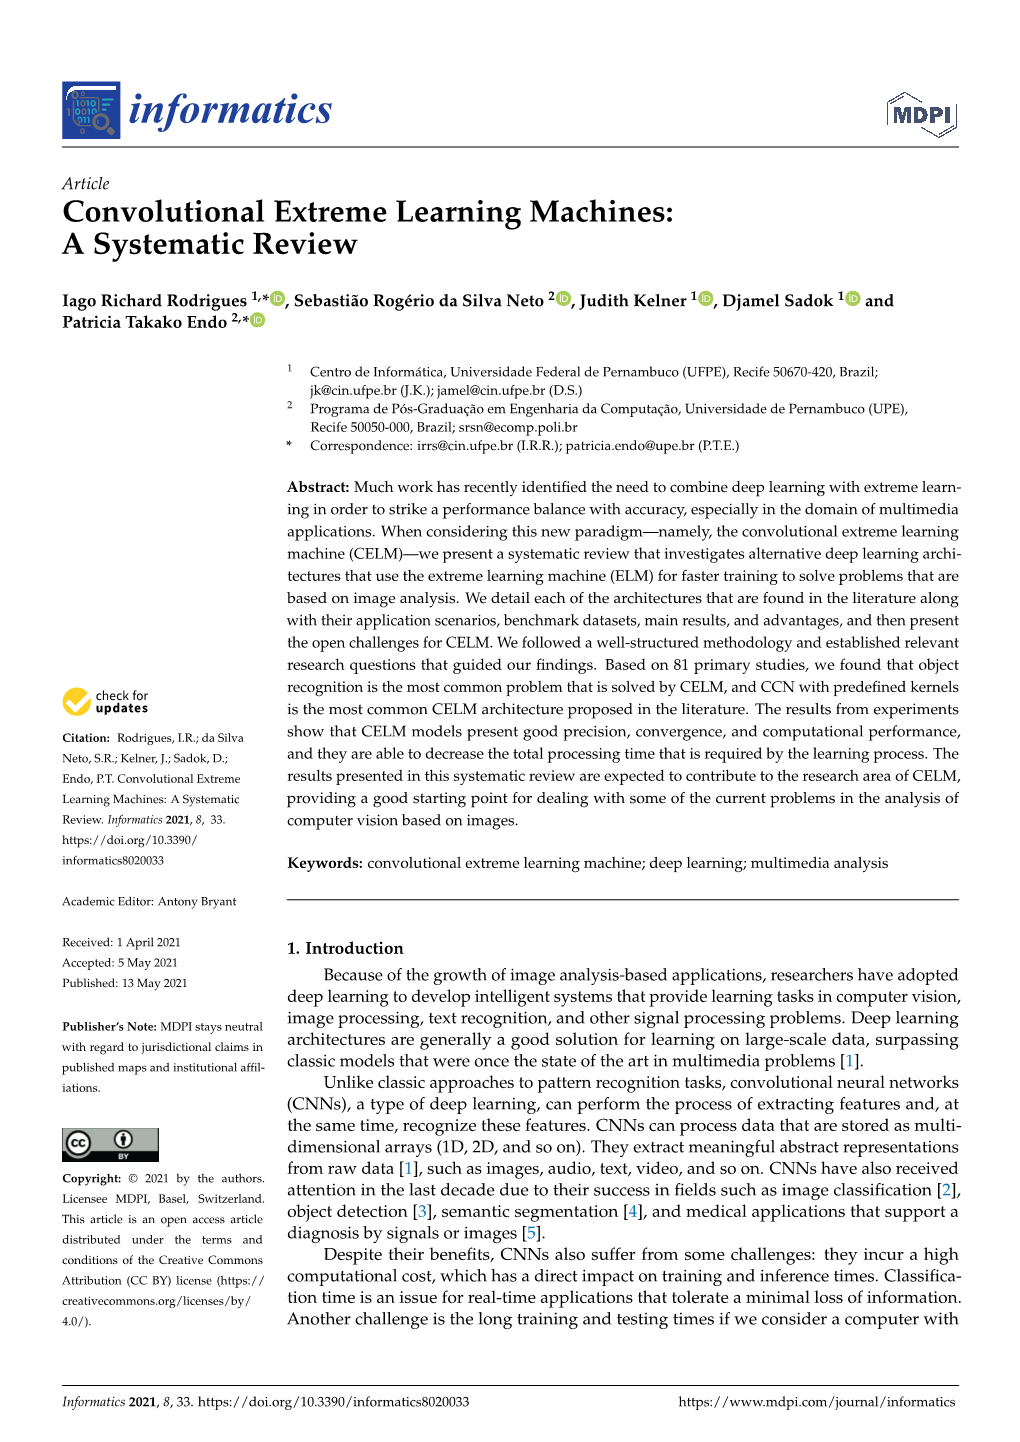 Convolutional Extreme Learning Machines: a Systematic Review